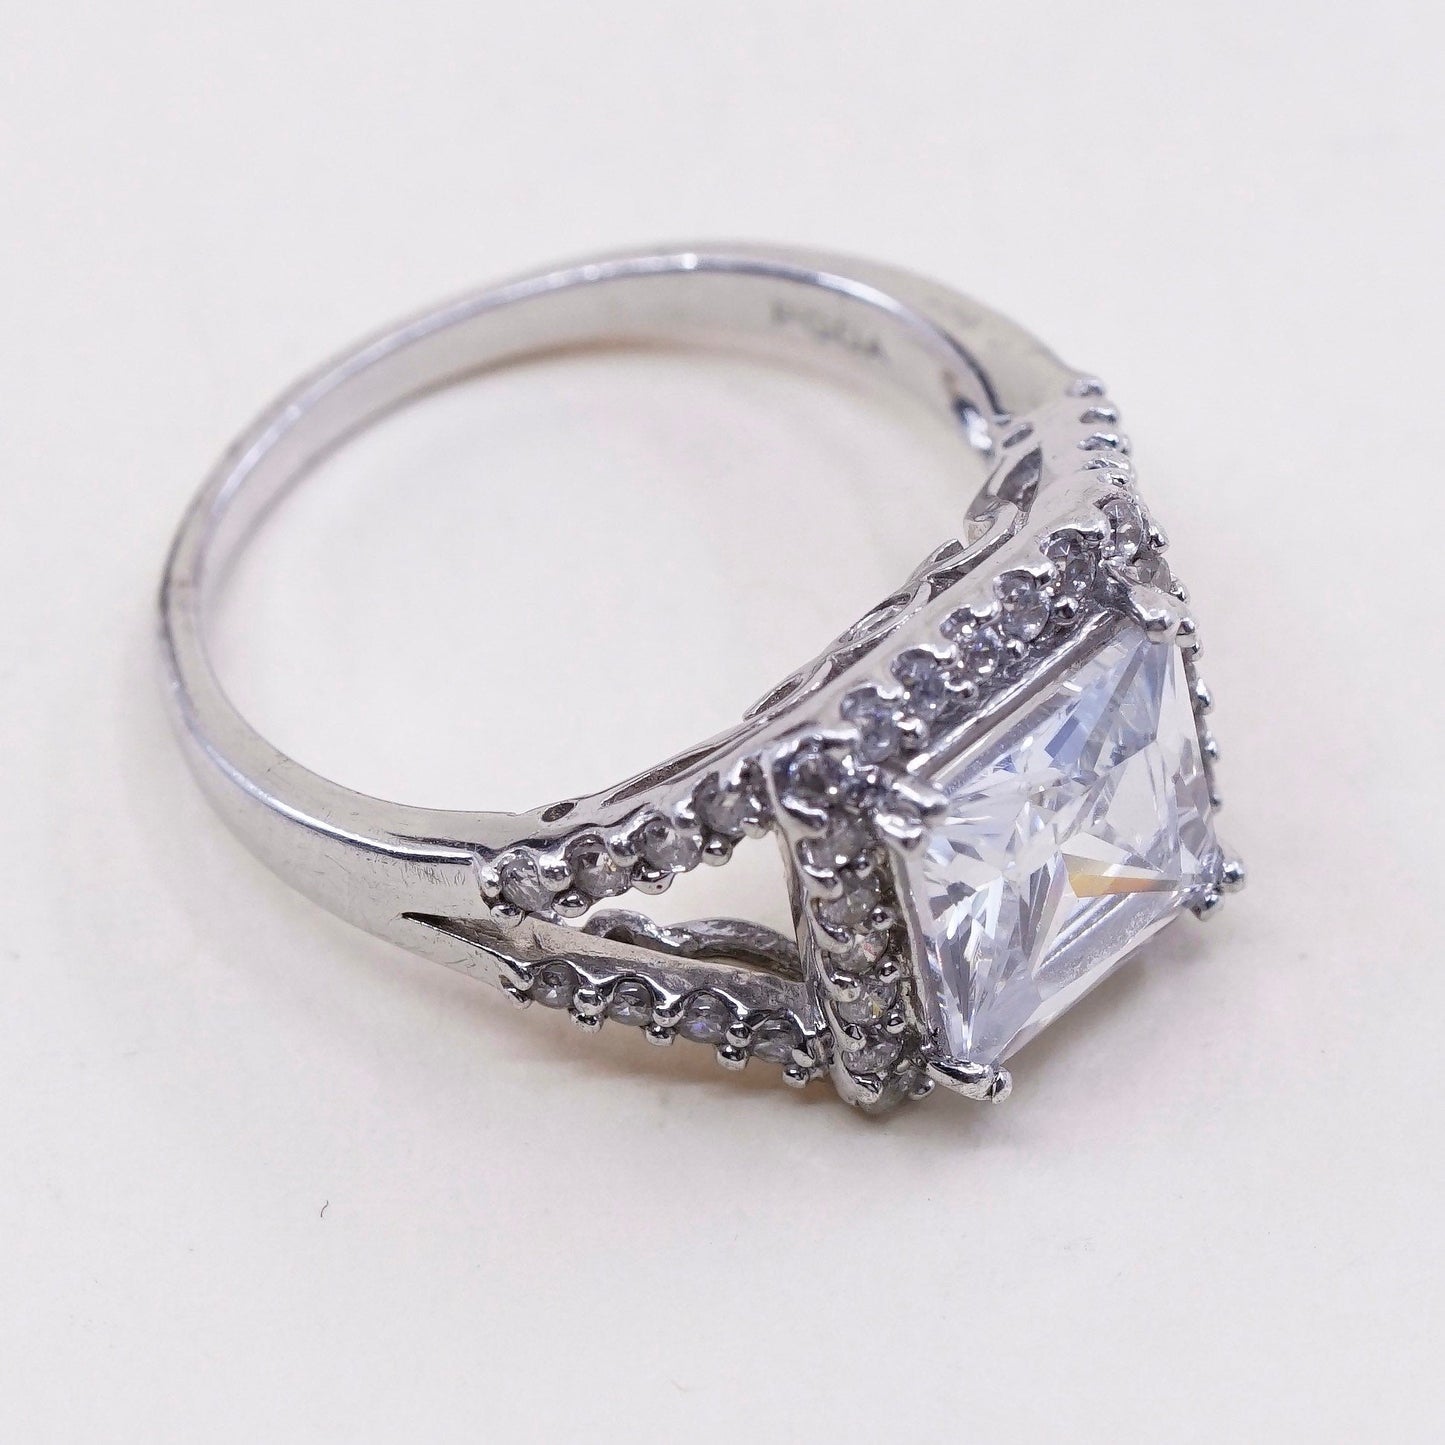 Size 7, vintage PGDA Sterling 925 silver with cz engagement ring